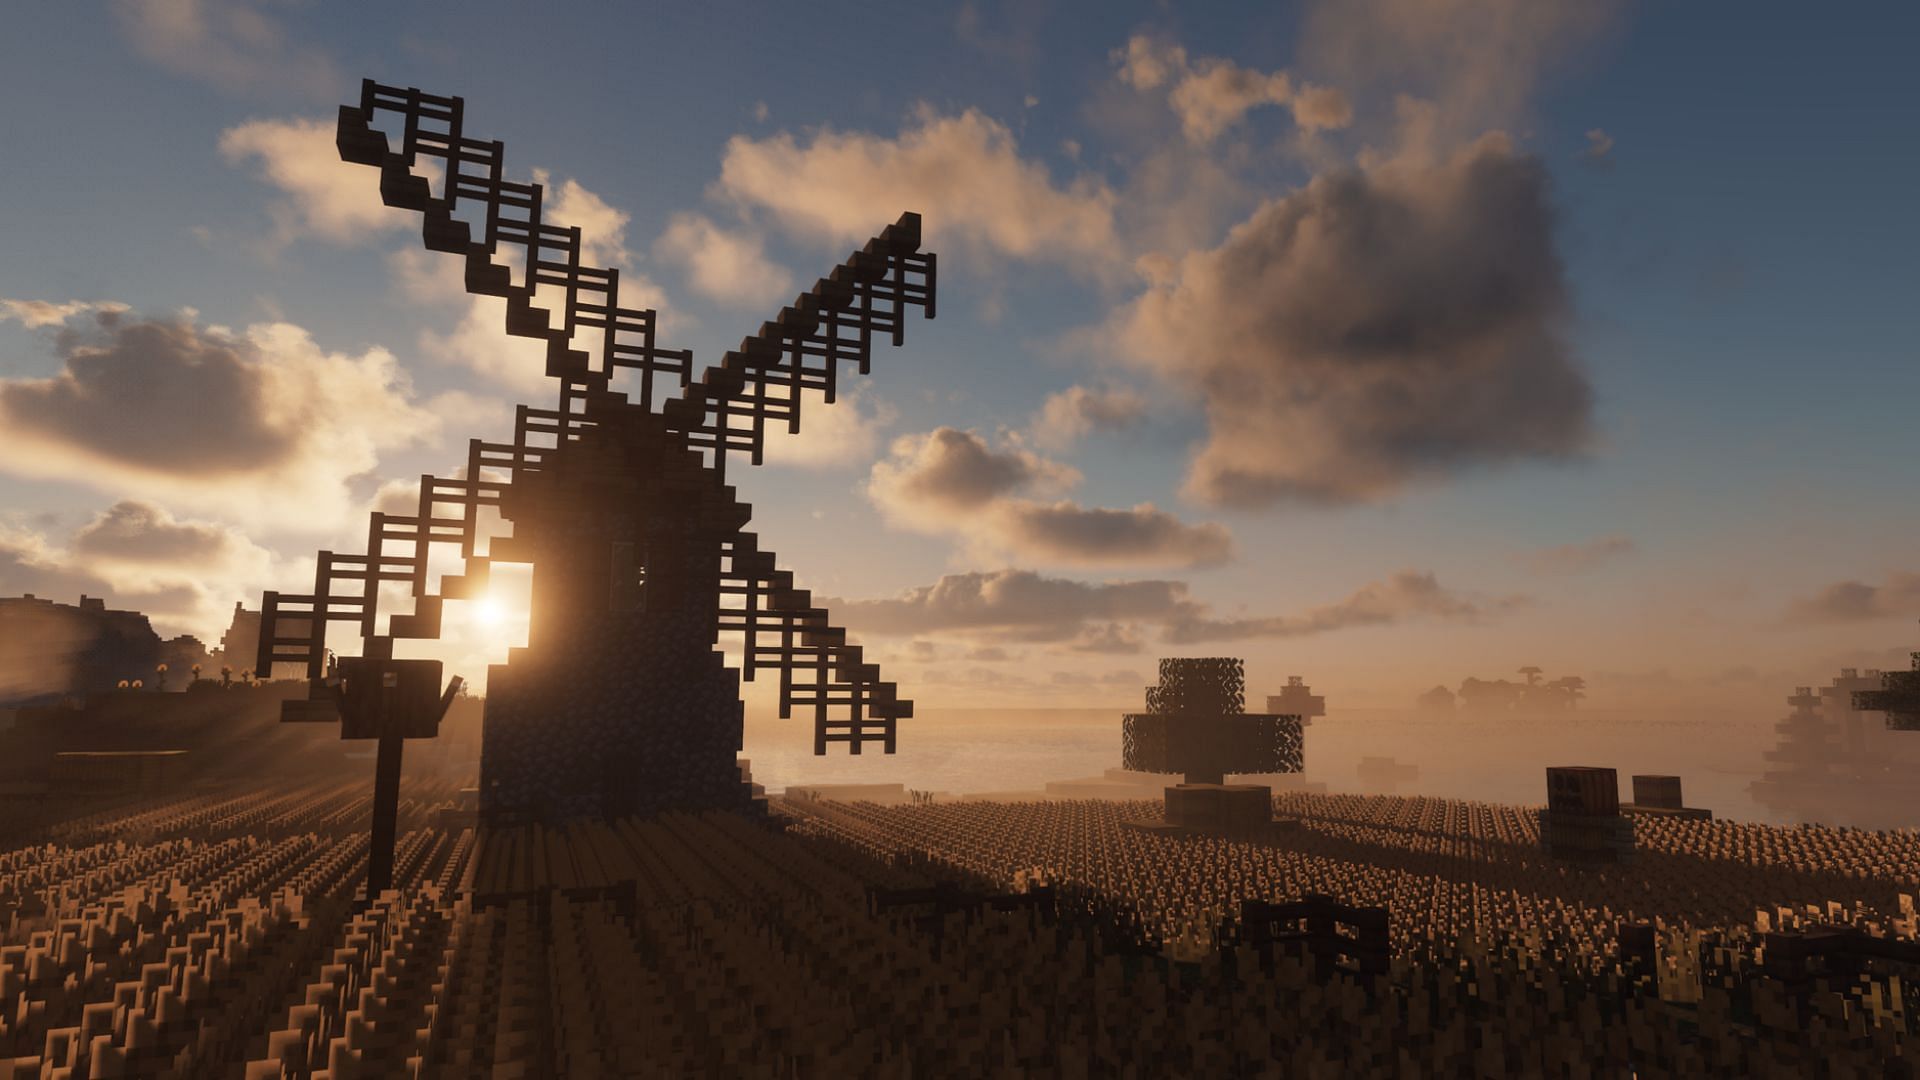 Continuum shaders look the most realistic in the game. (Image via Continuum Graphics)